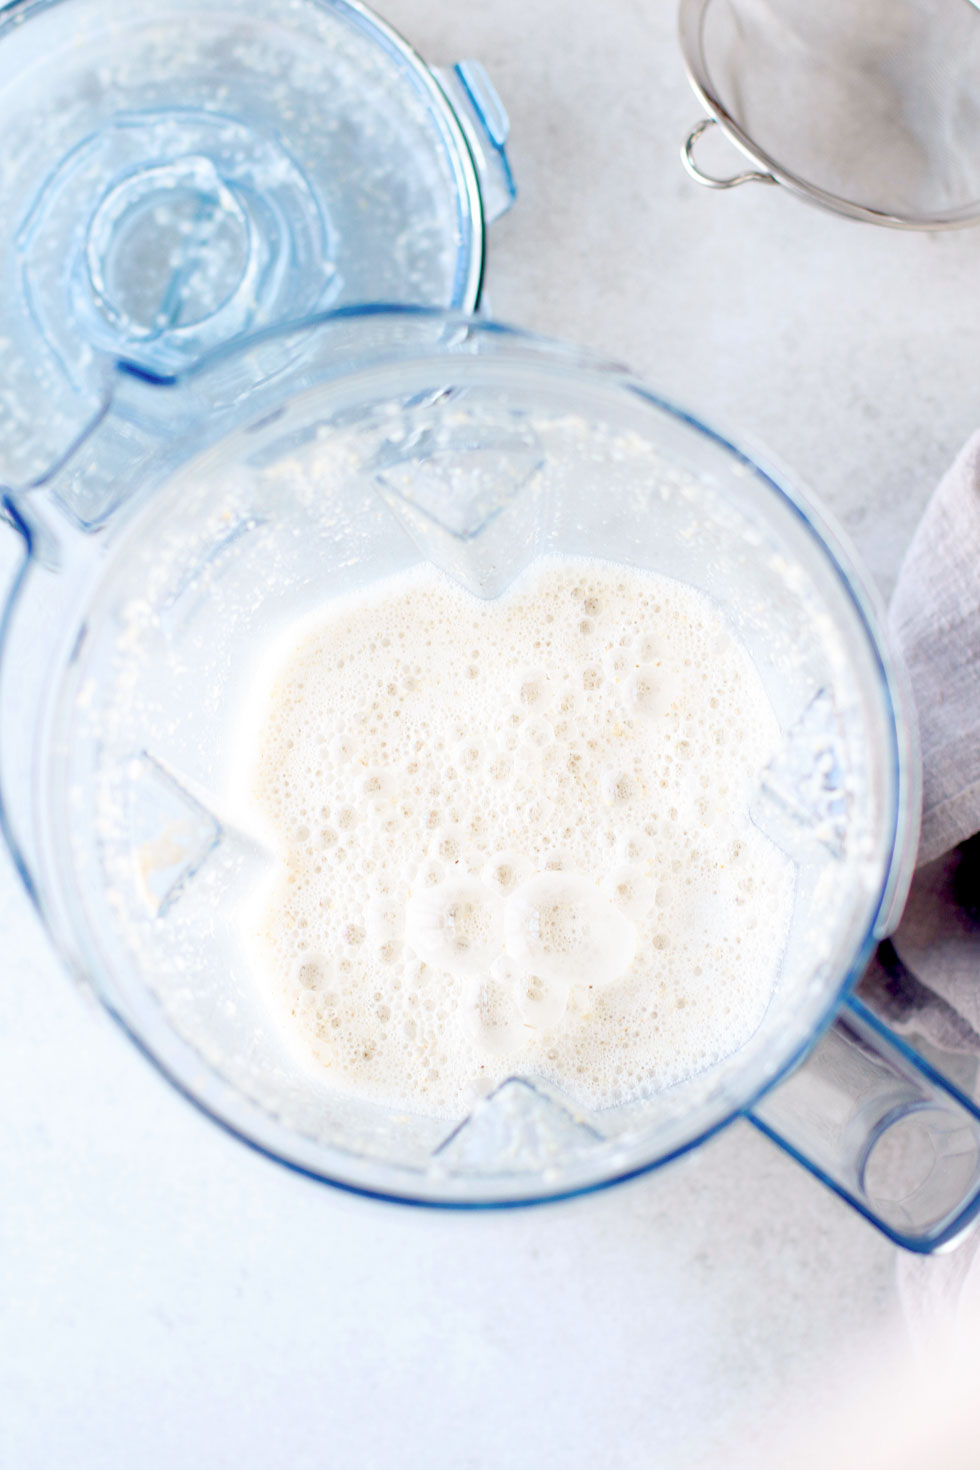 How to Make Oat Milk Blended Oats and Water